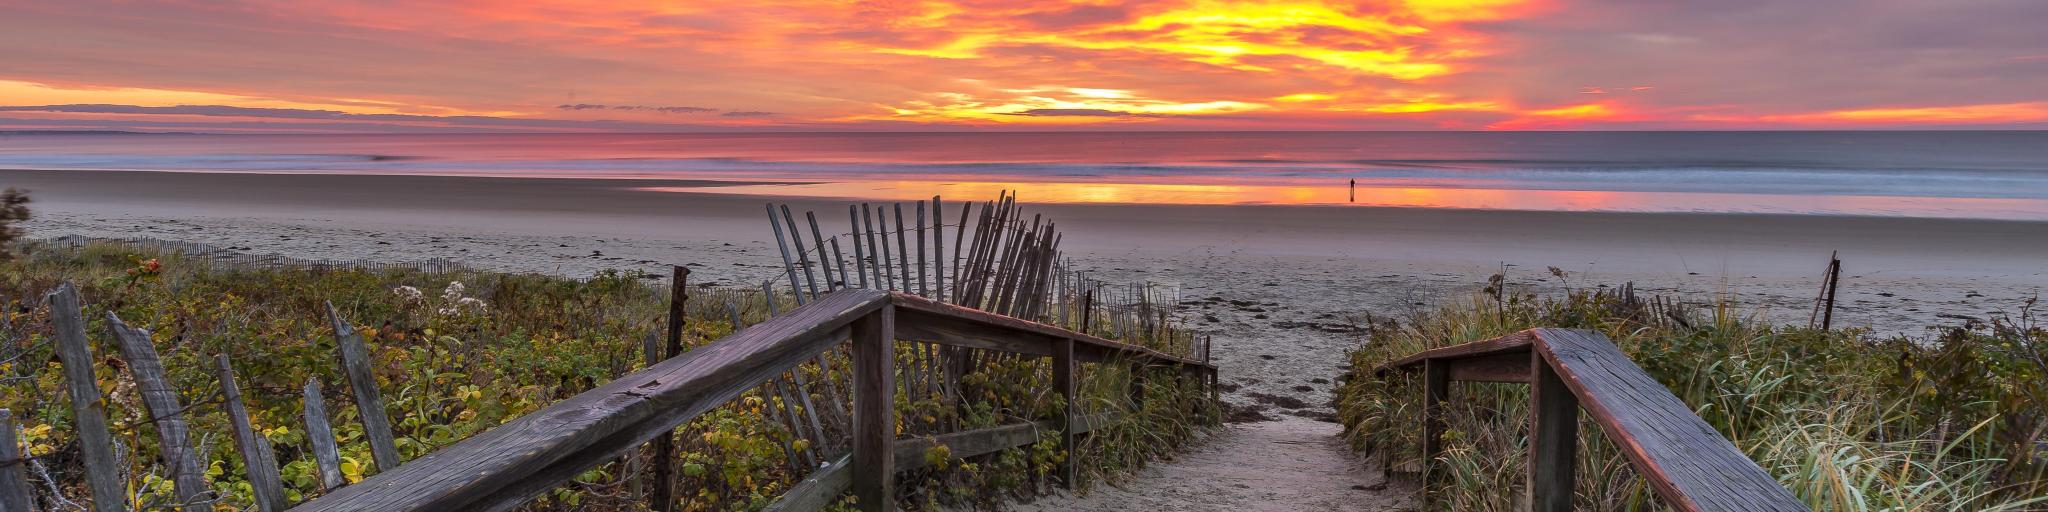 Board walk down to empty, wide, flat sandy beach with vibrant pink sunrise